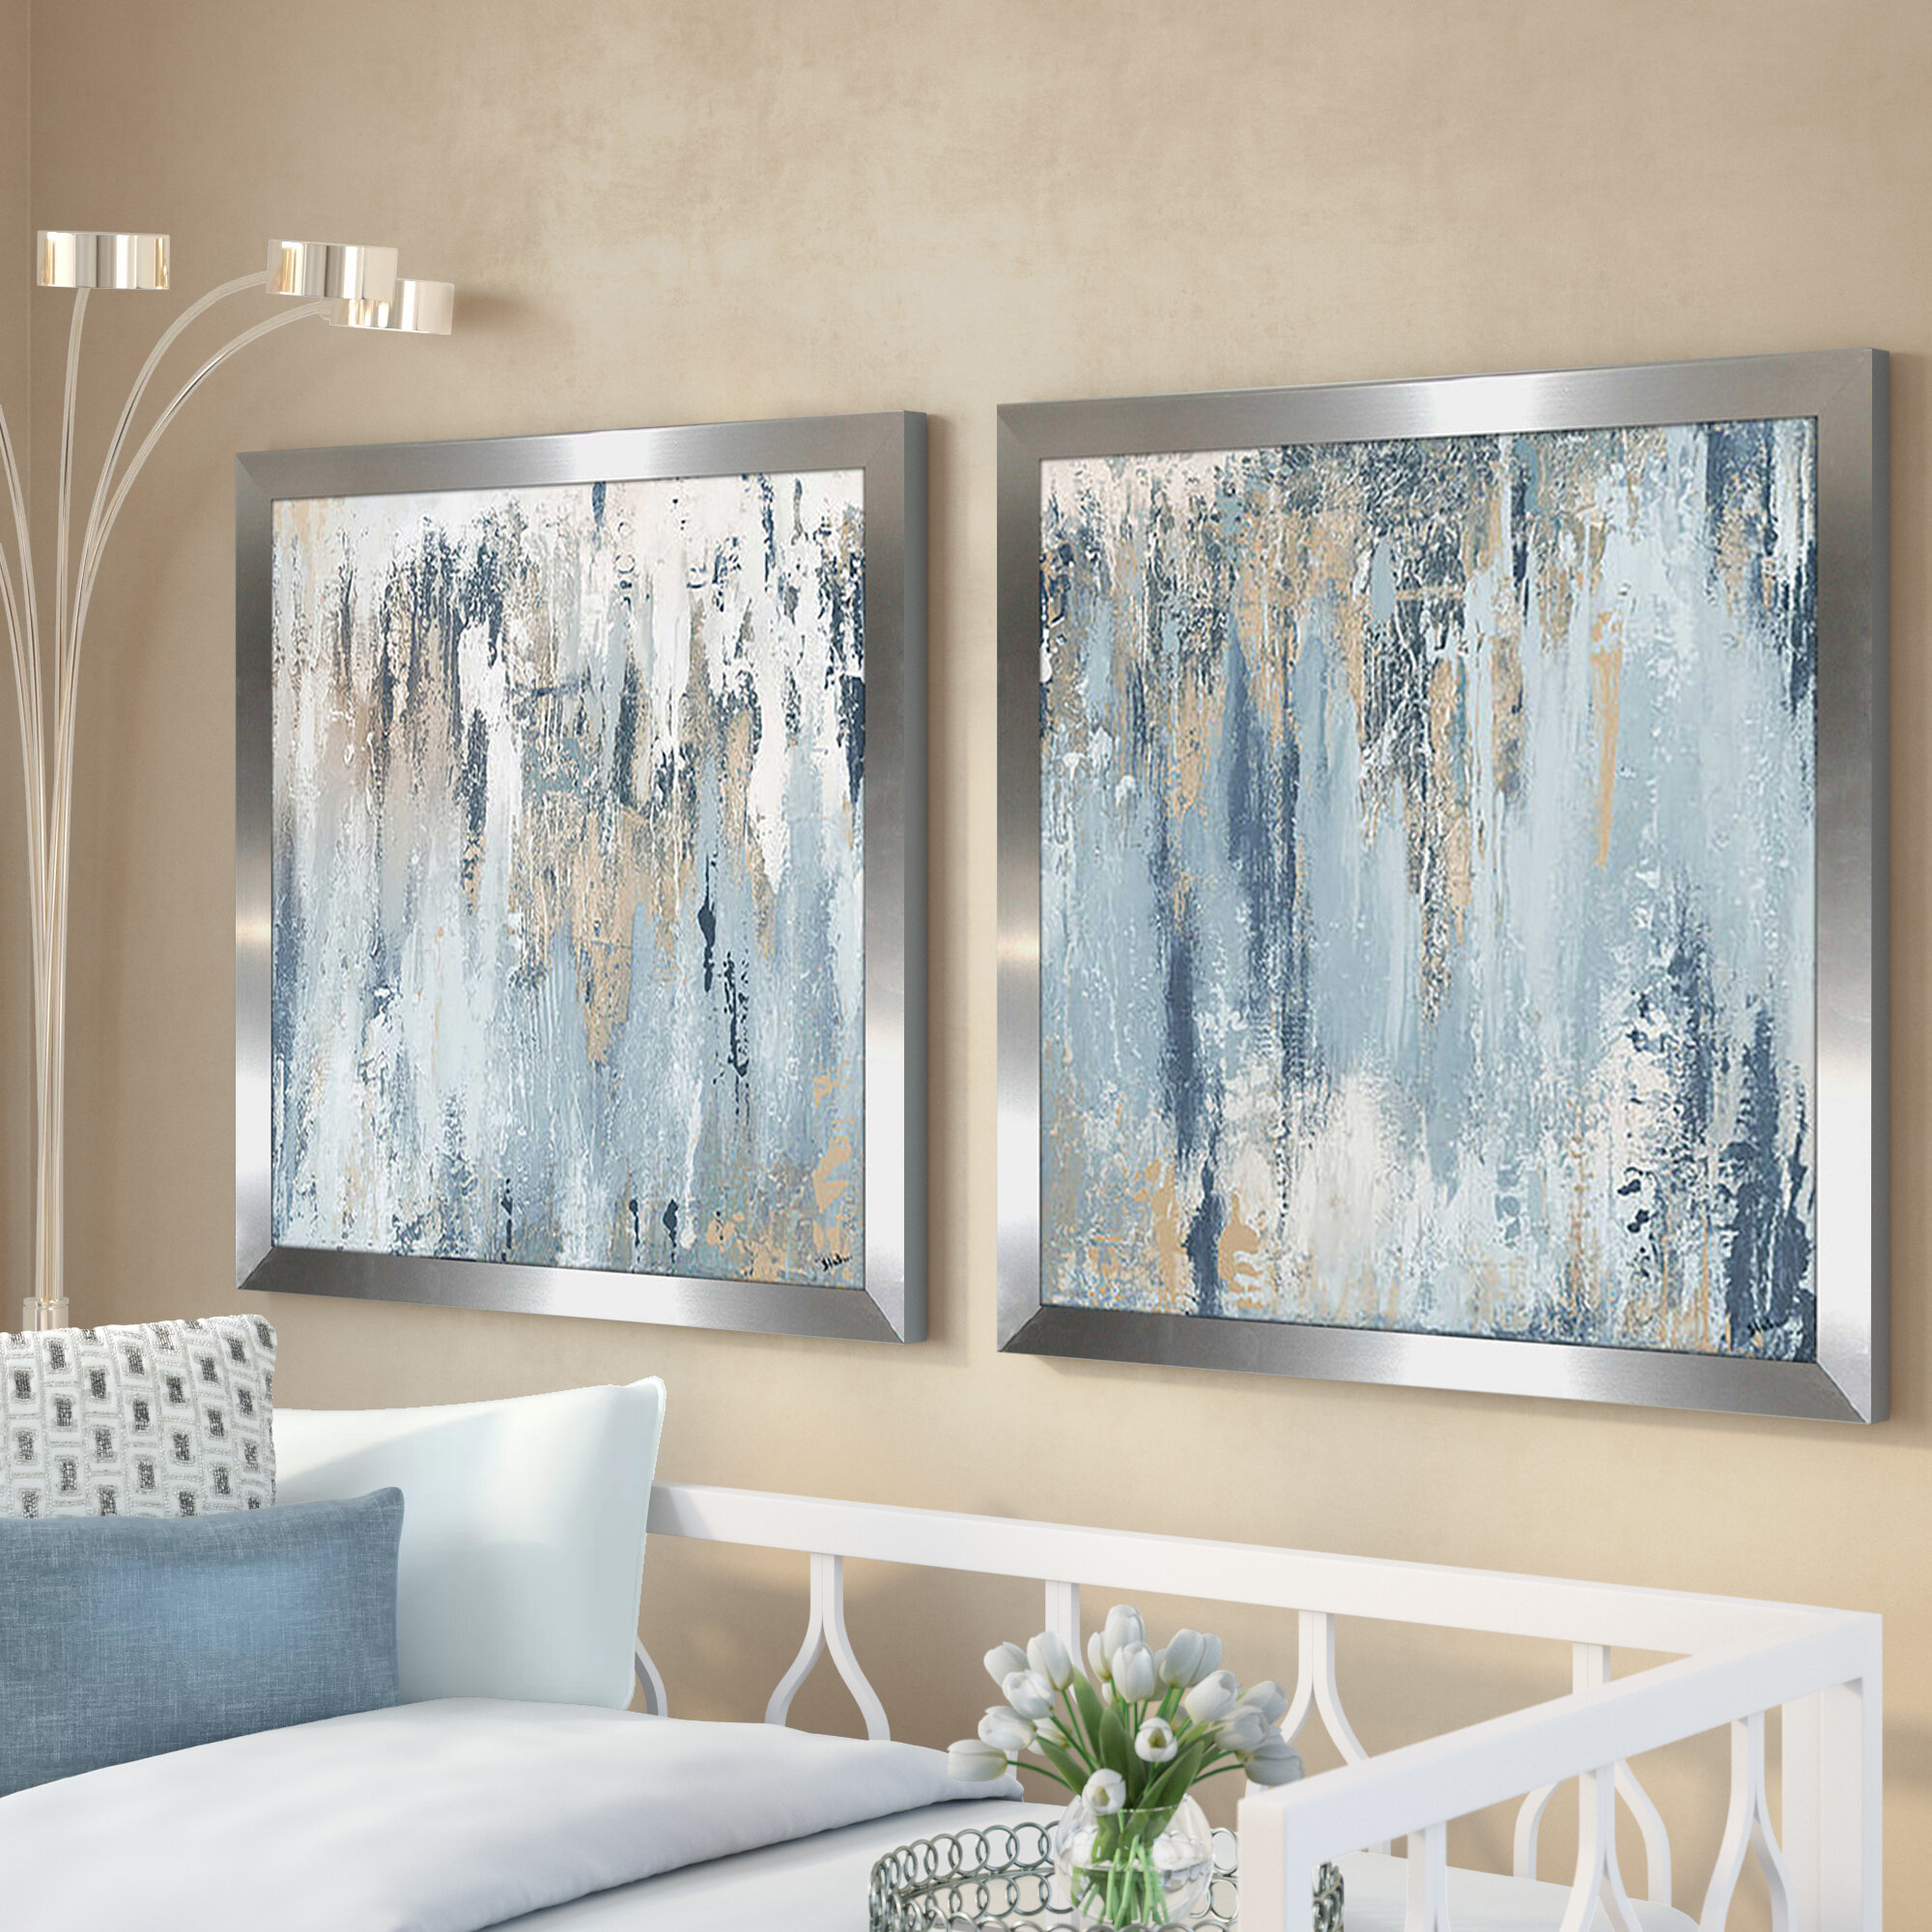 Framed 40 W x 20 H Seekland Art Hand Painted Textured Modern Wall Art on Canvas Abstract Oil Painting Contemporary Cityscape Decor Picture for Living Room Bedroom Stretched Ready to Hang